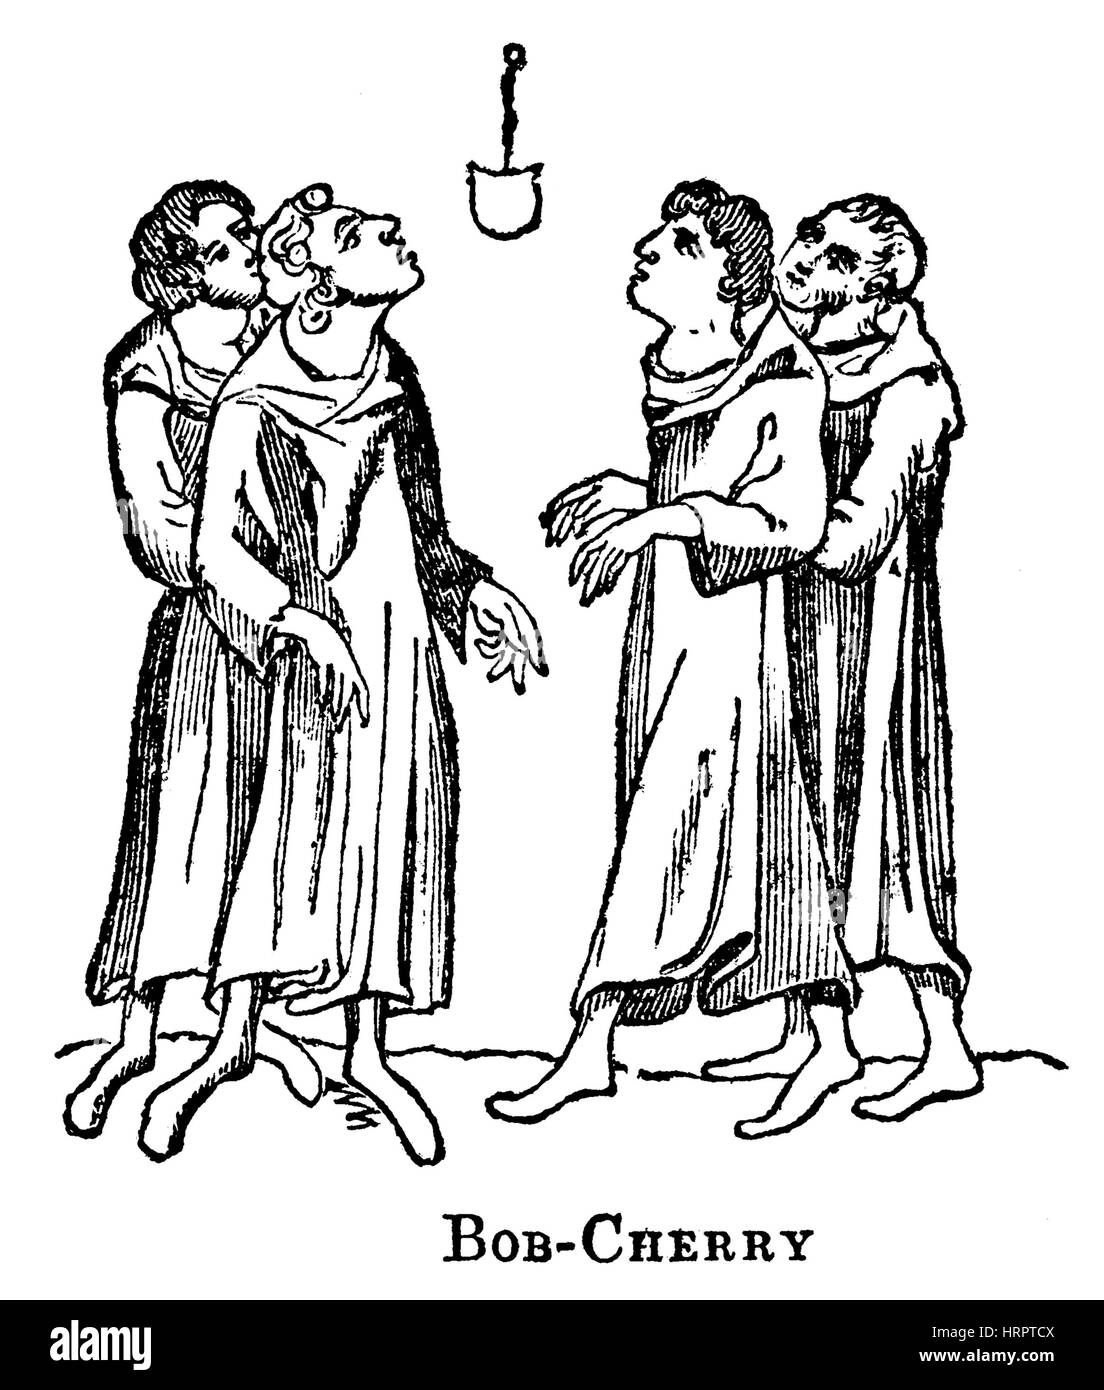 An illustration of a Game of Bob Cherry in the 14th Century scanned at high resolution from a book printed in 1831. This image is believed to be free  Stock Photo